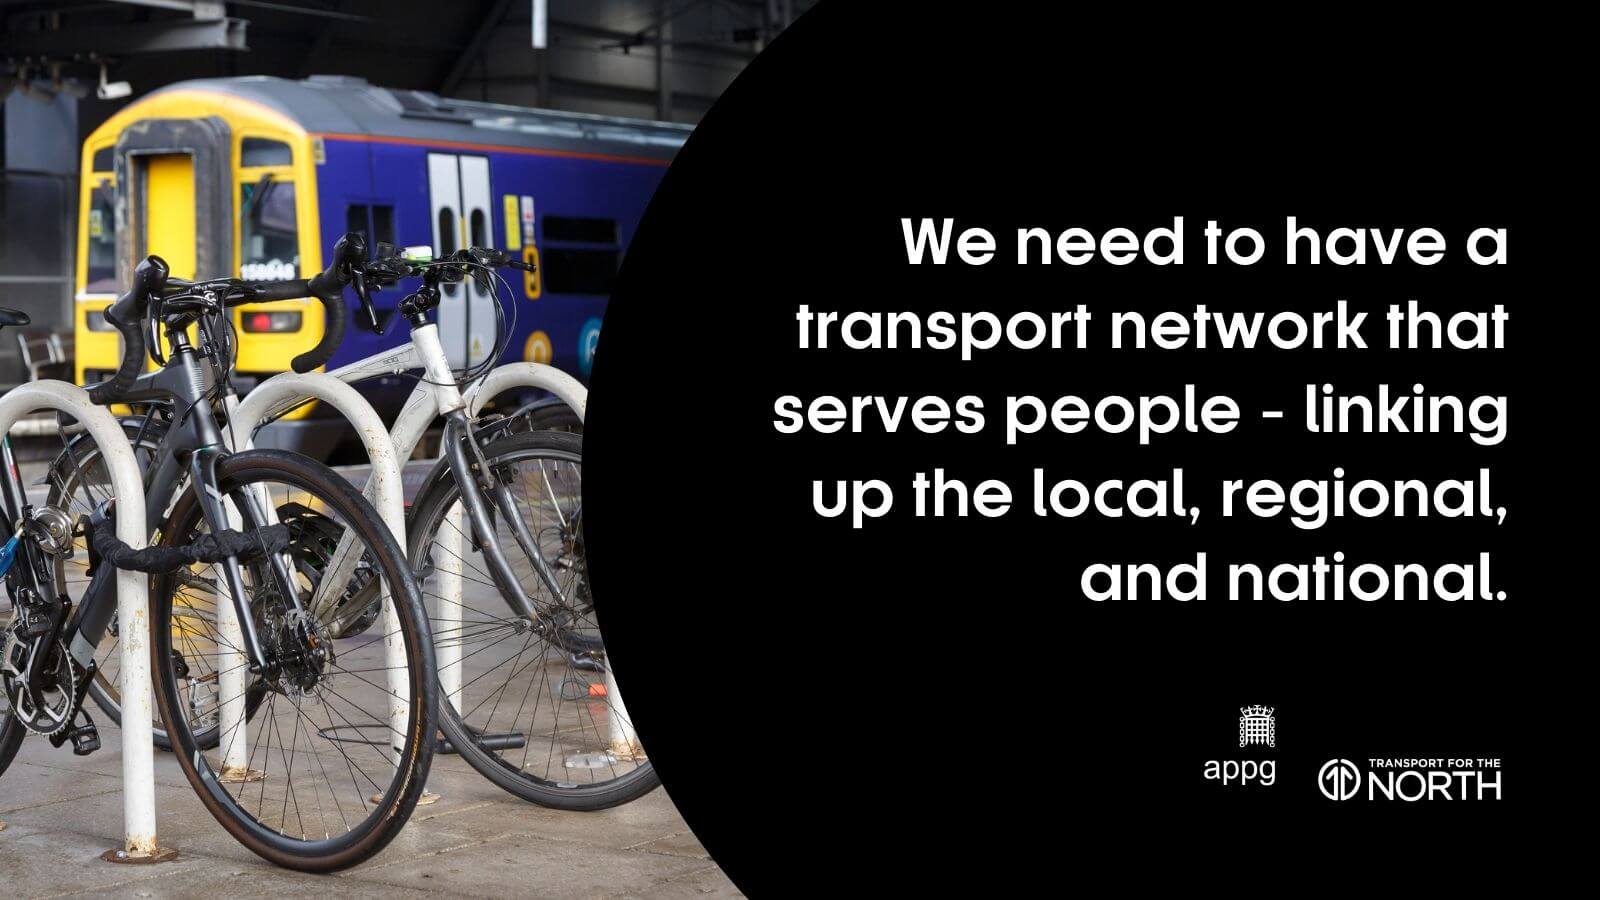 APPG transport network quote